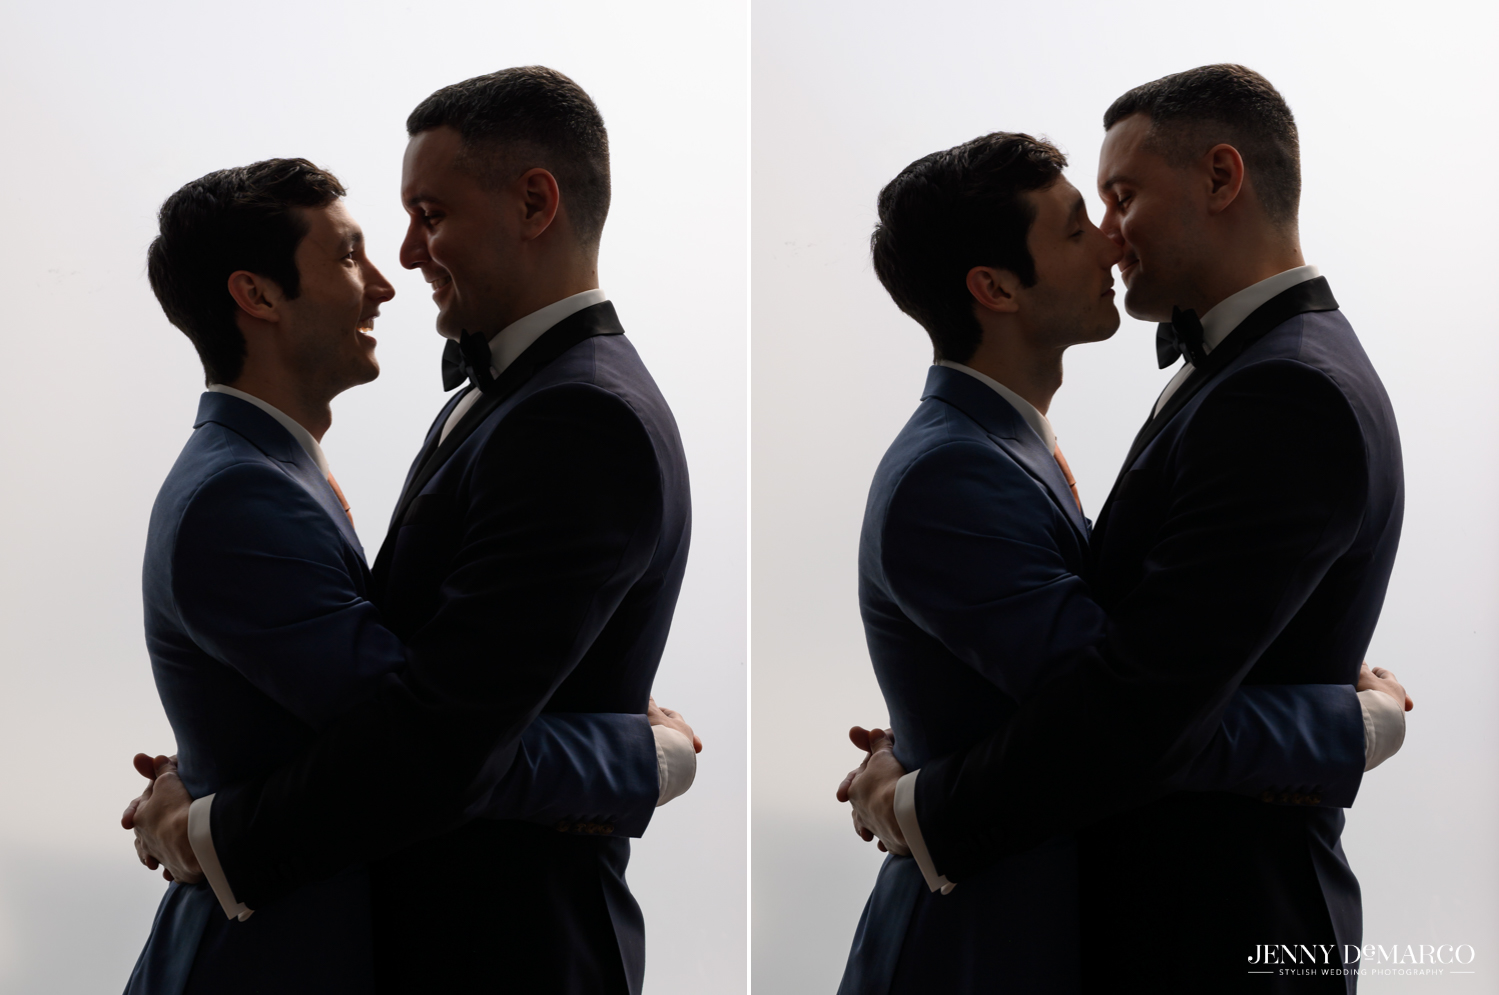 Left: Grooms embracing and looking at each other smiling; Right: grooms embracing and kissing